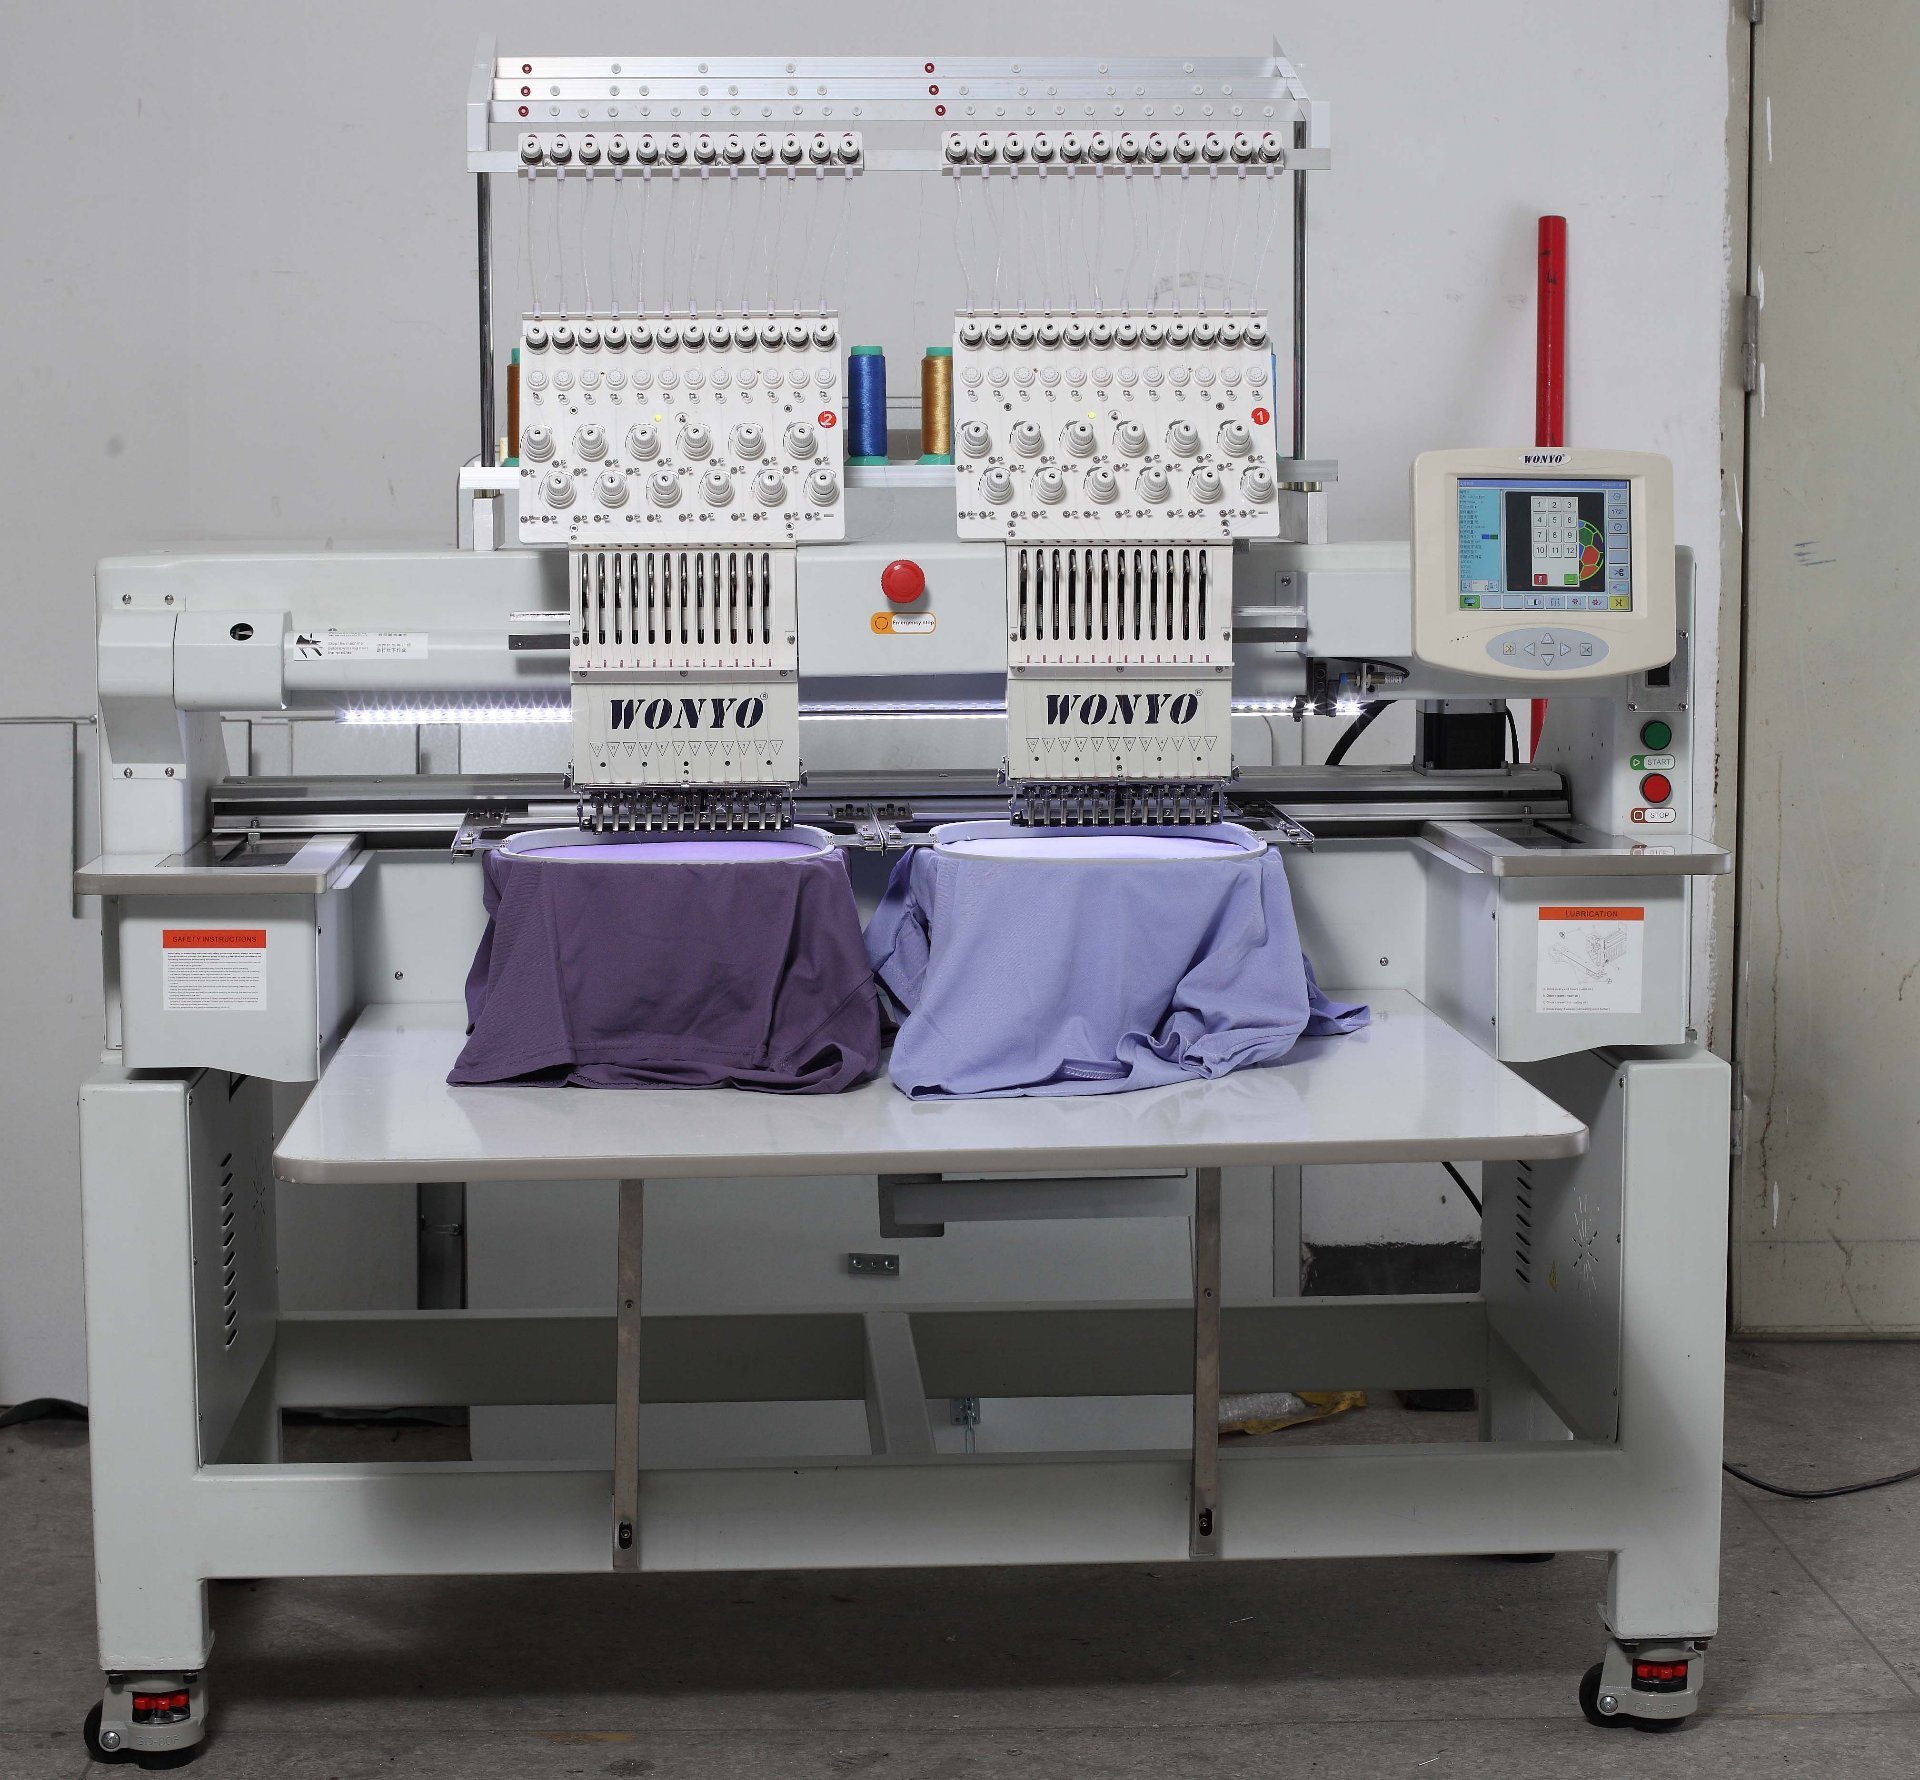 Commercial 2 Head Multi Needle Embroidery Machine for Sale Wy1202c